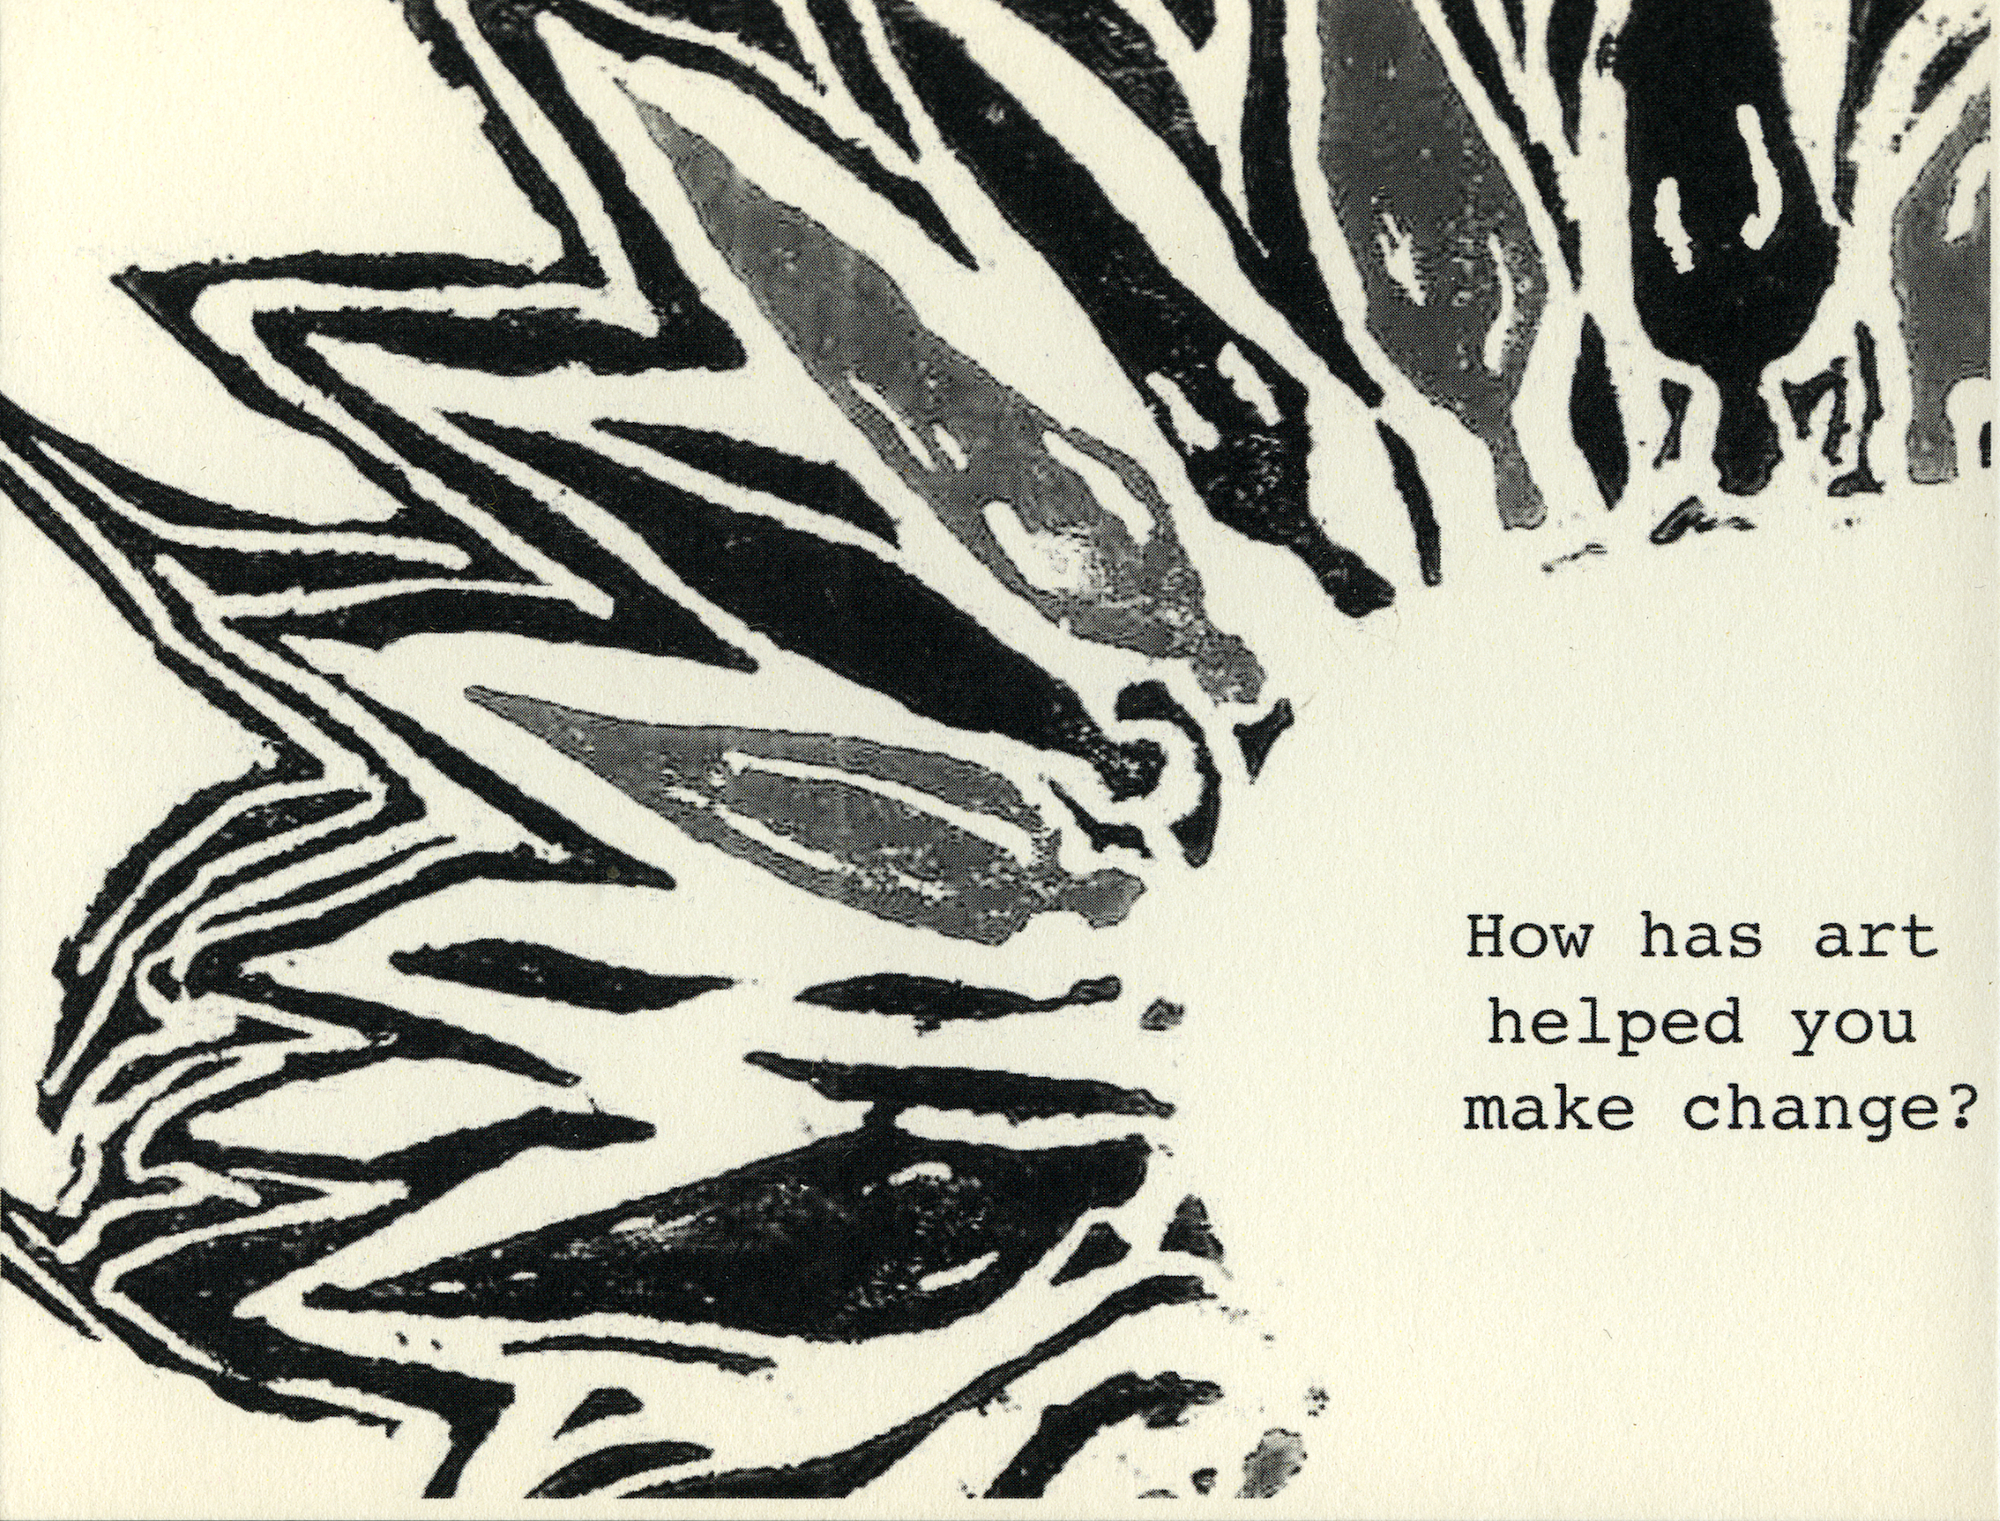 Image: A takeaway postcard from Leah Gipson's installation in the Participatory Arts exhibition at Hull-House. The postcard contains a fraction of a radial design, with text that says "How has art helped you make change?" Courtesy of the artist.